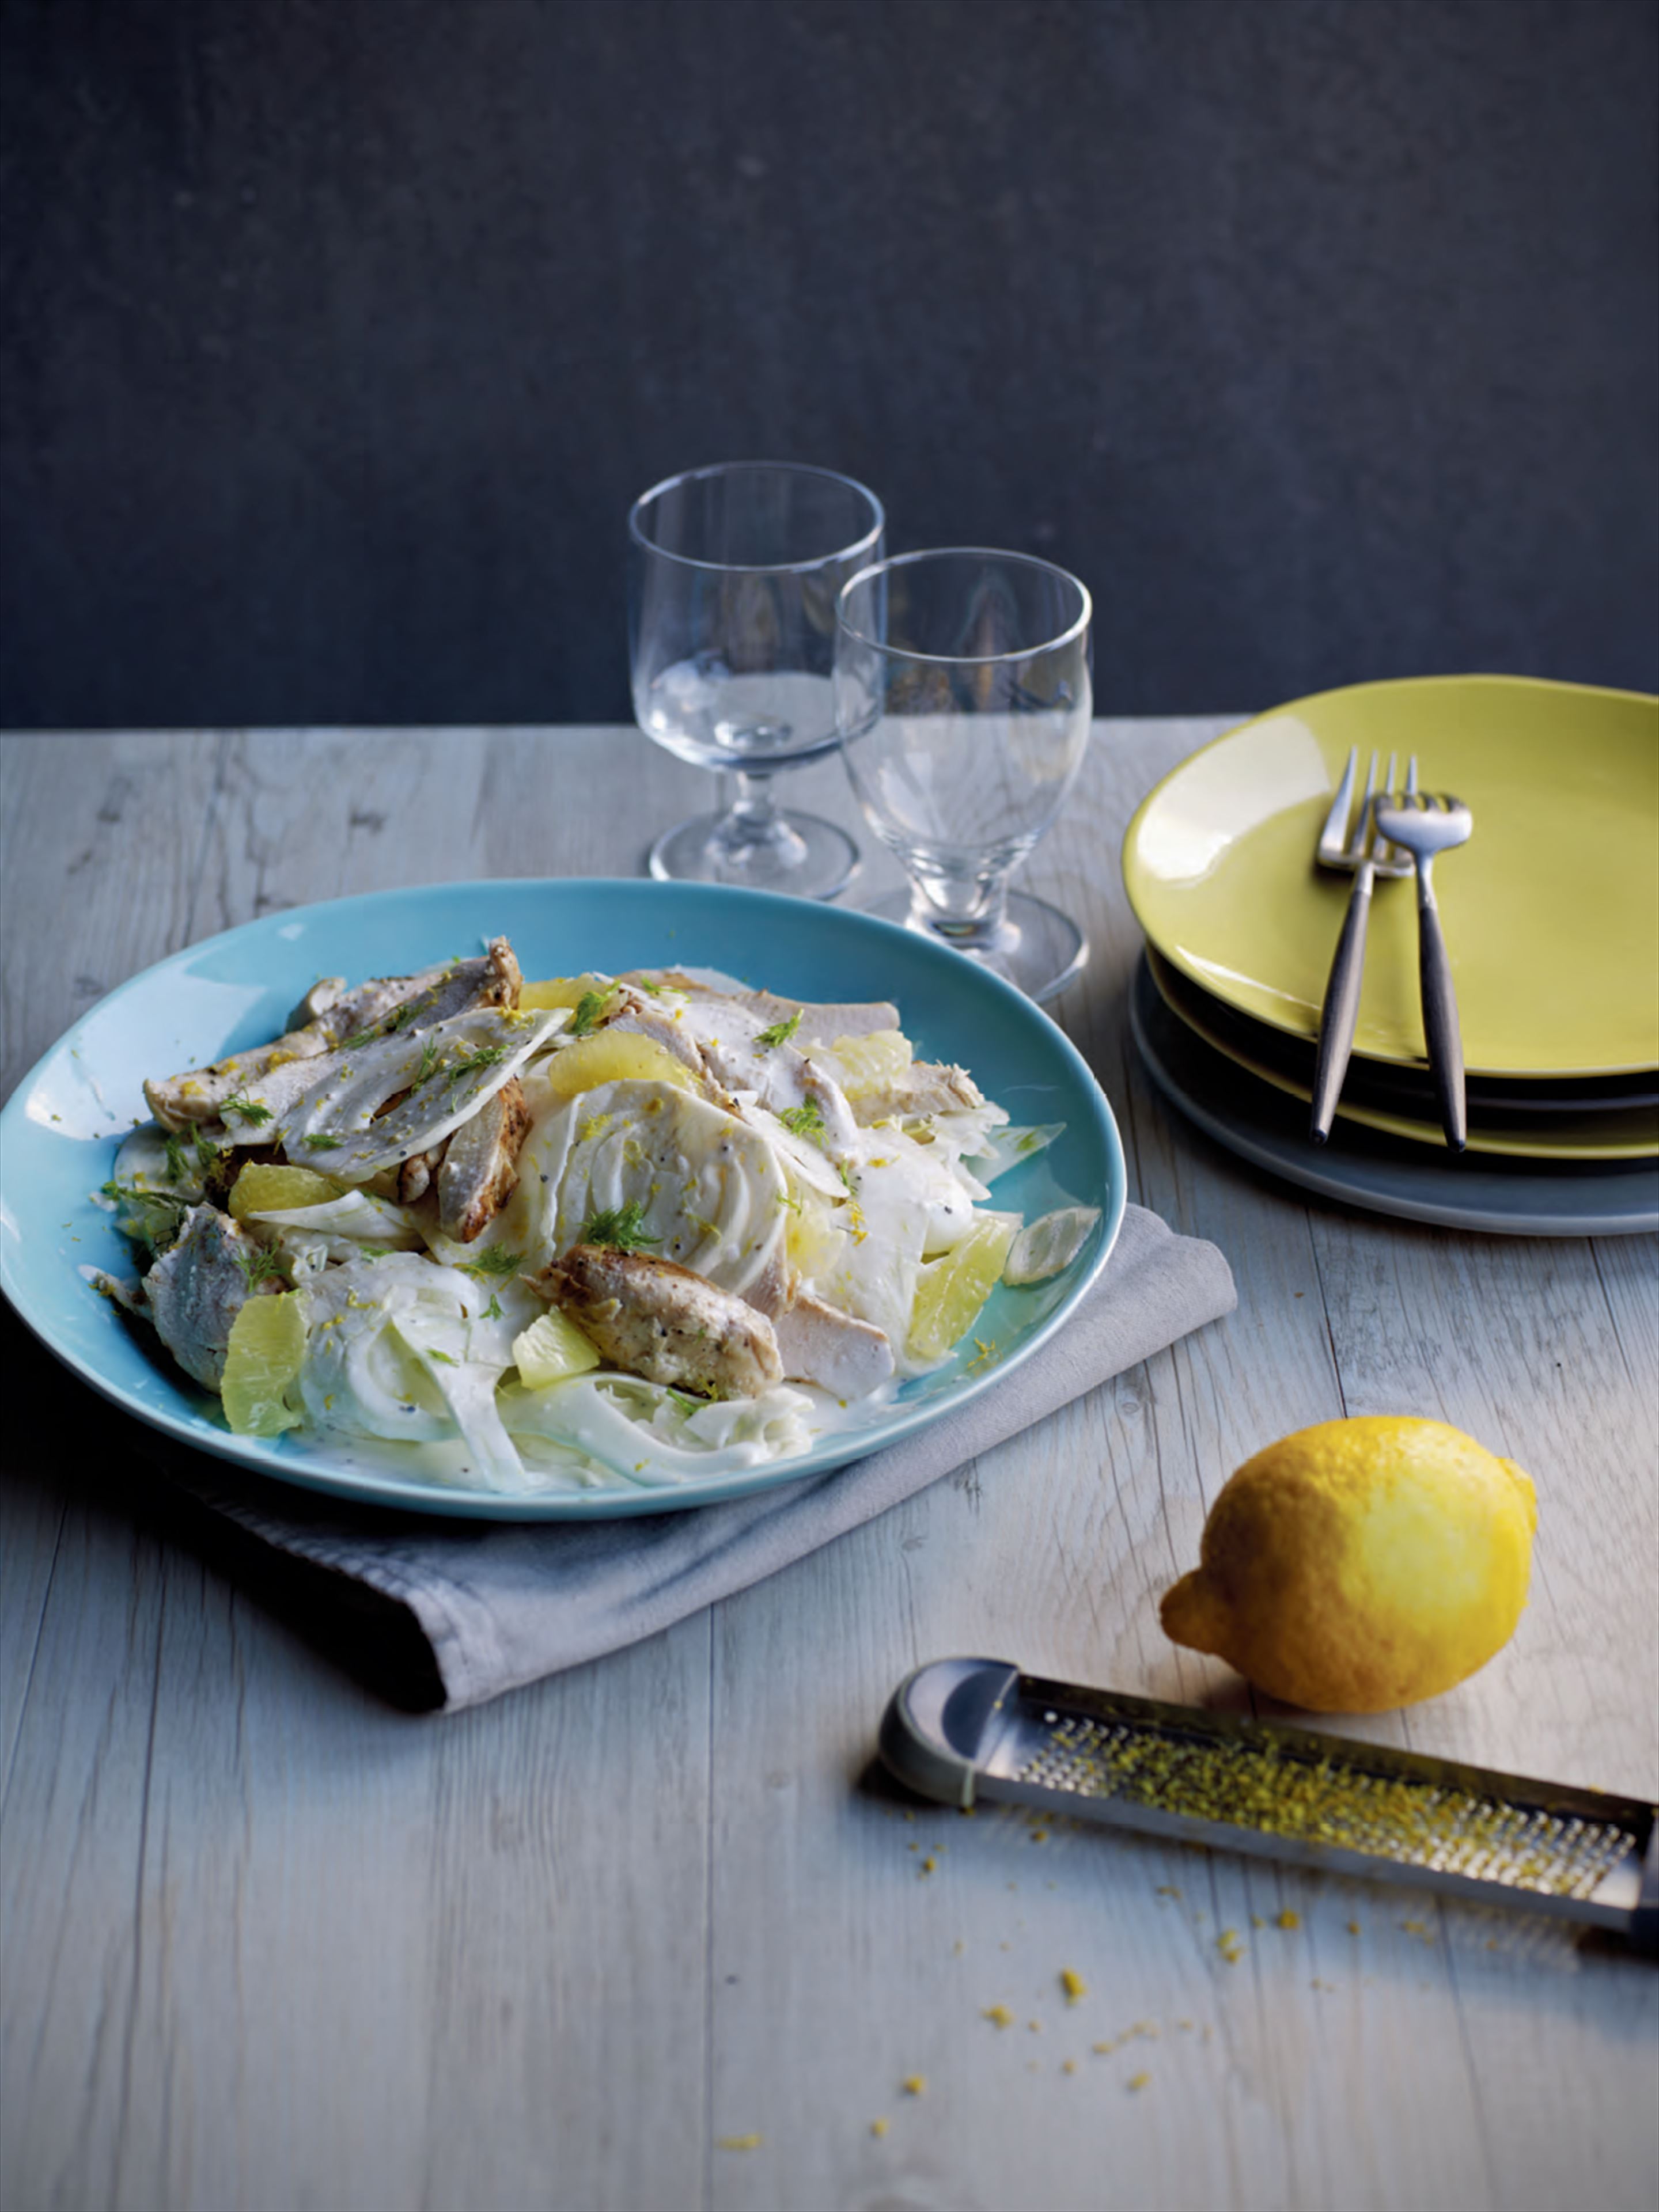 Pan-fried chicken with lemon & fennel salad